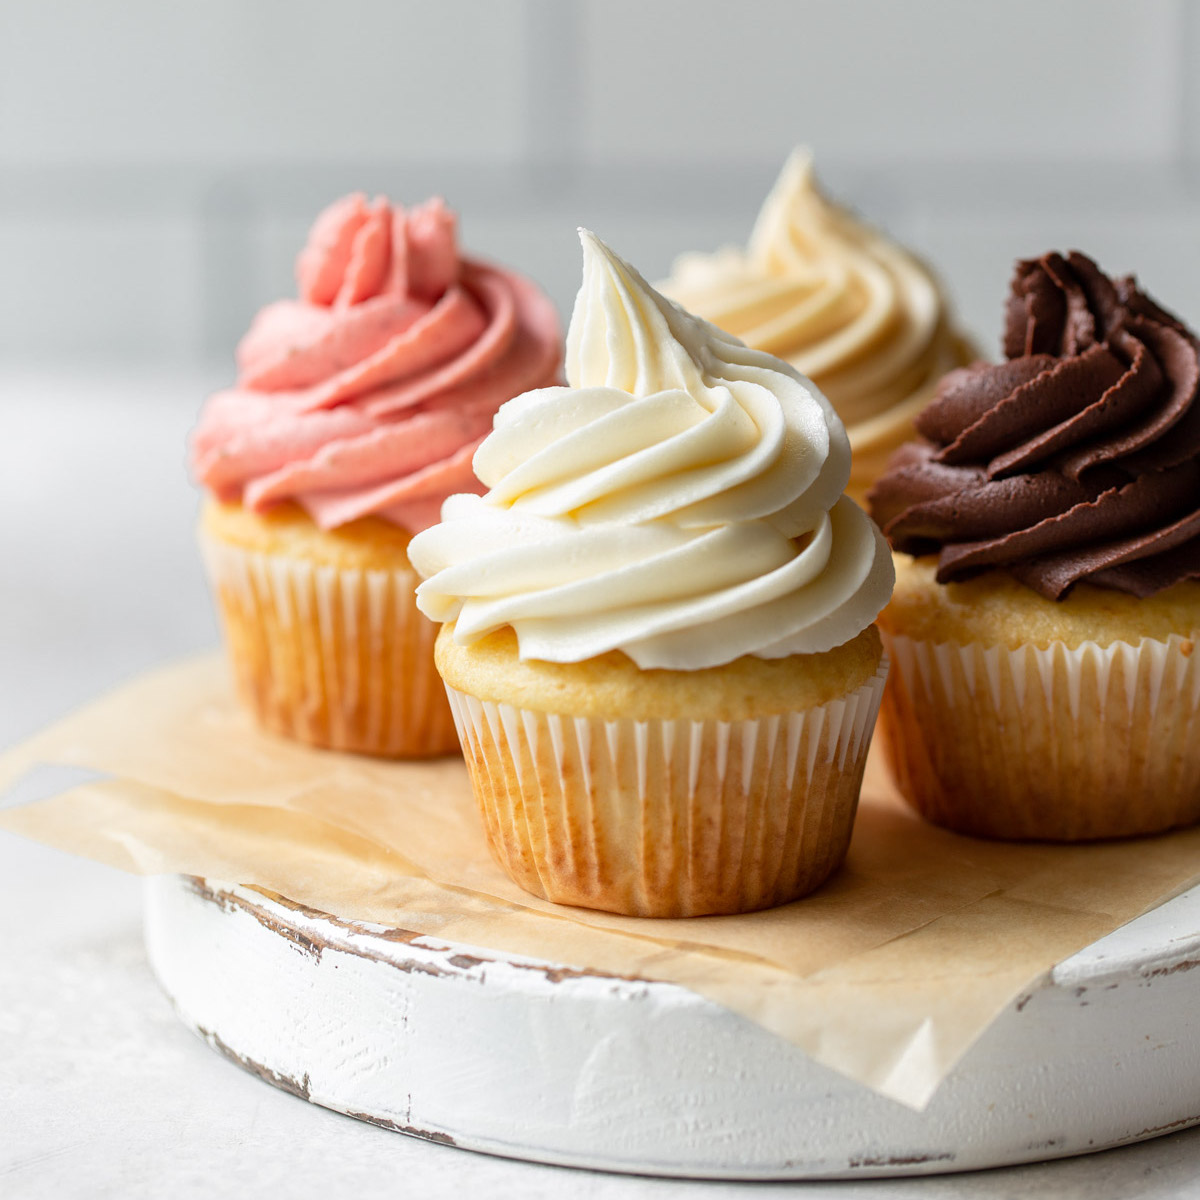 How To Store Cupcakes With Buttercream Frosting